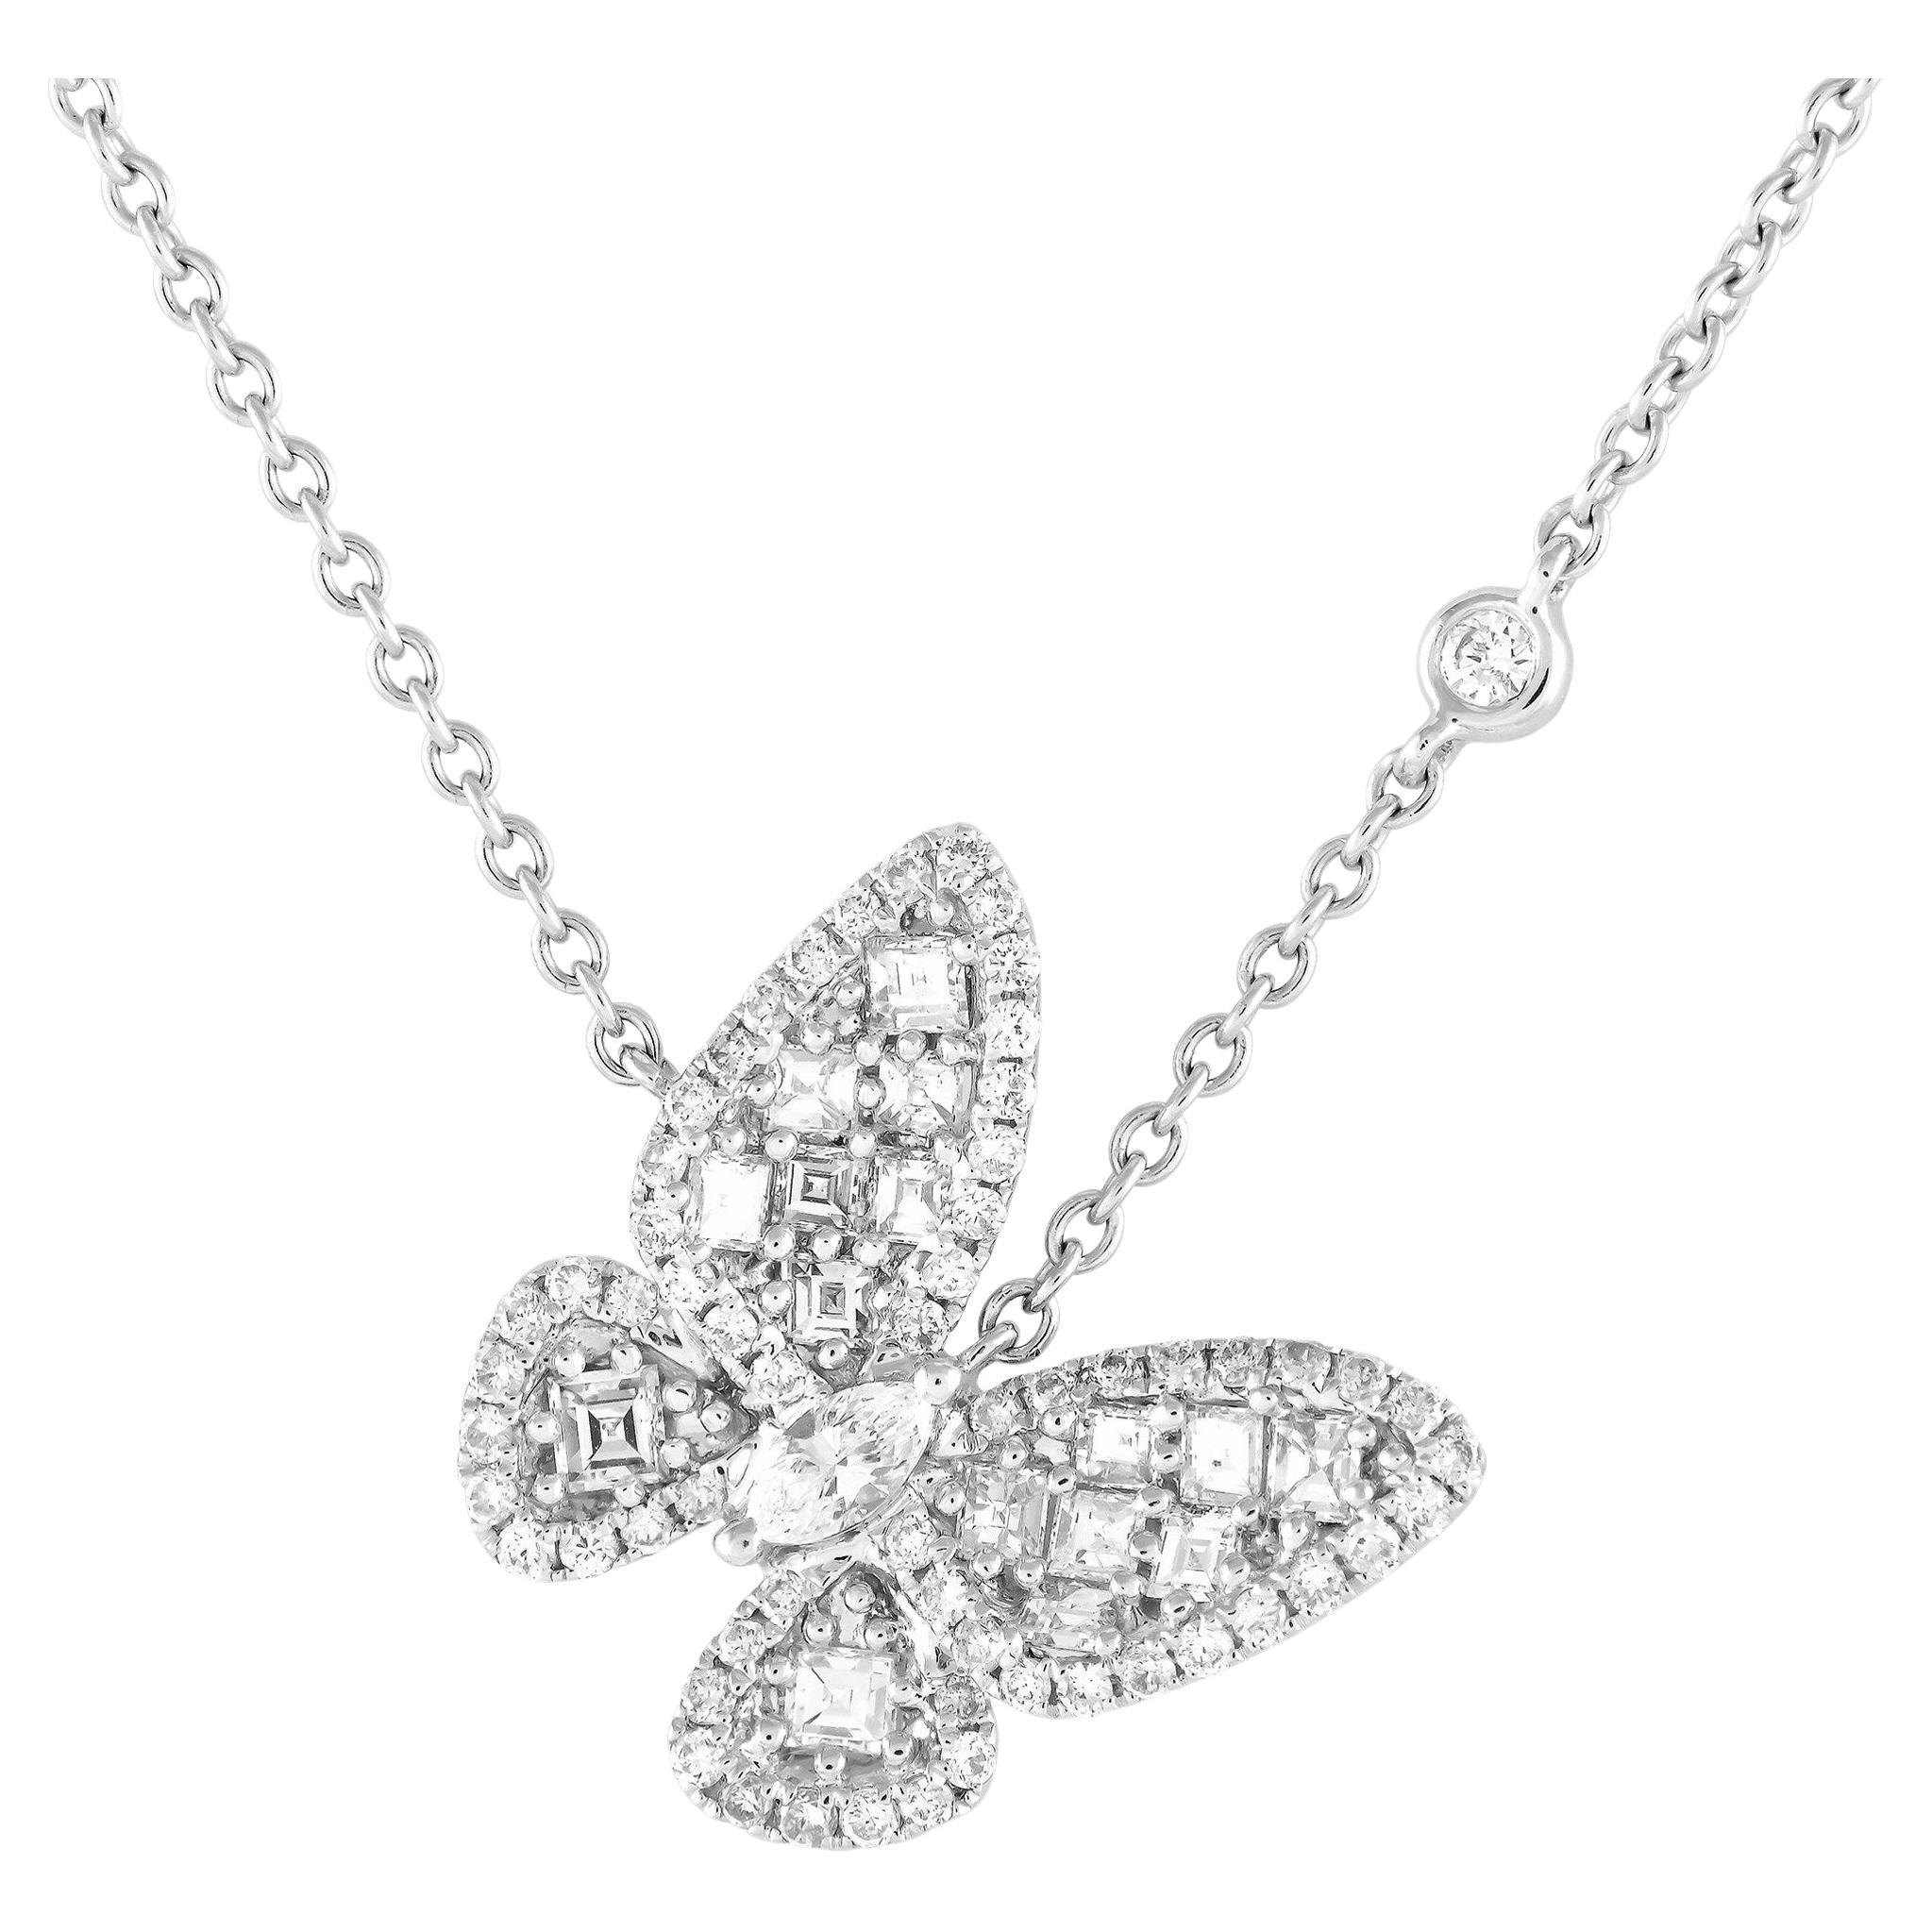 LB Exclusive 18K White Gold 1.0ct Diamond Butterfly Necklace For Sale